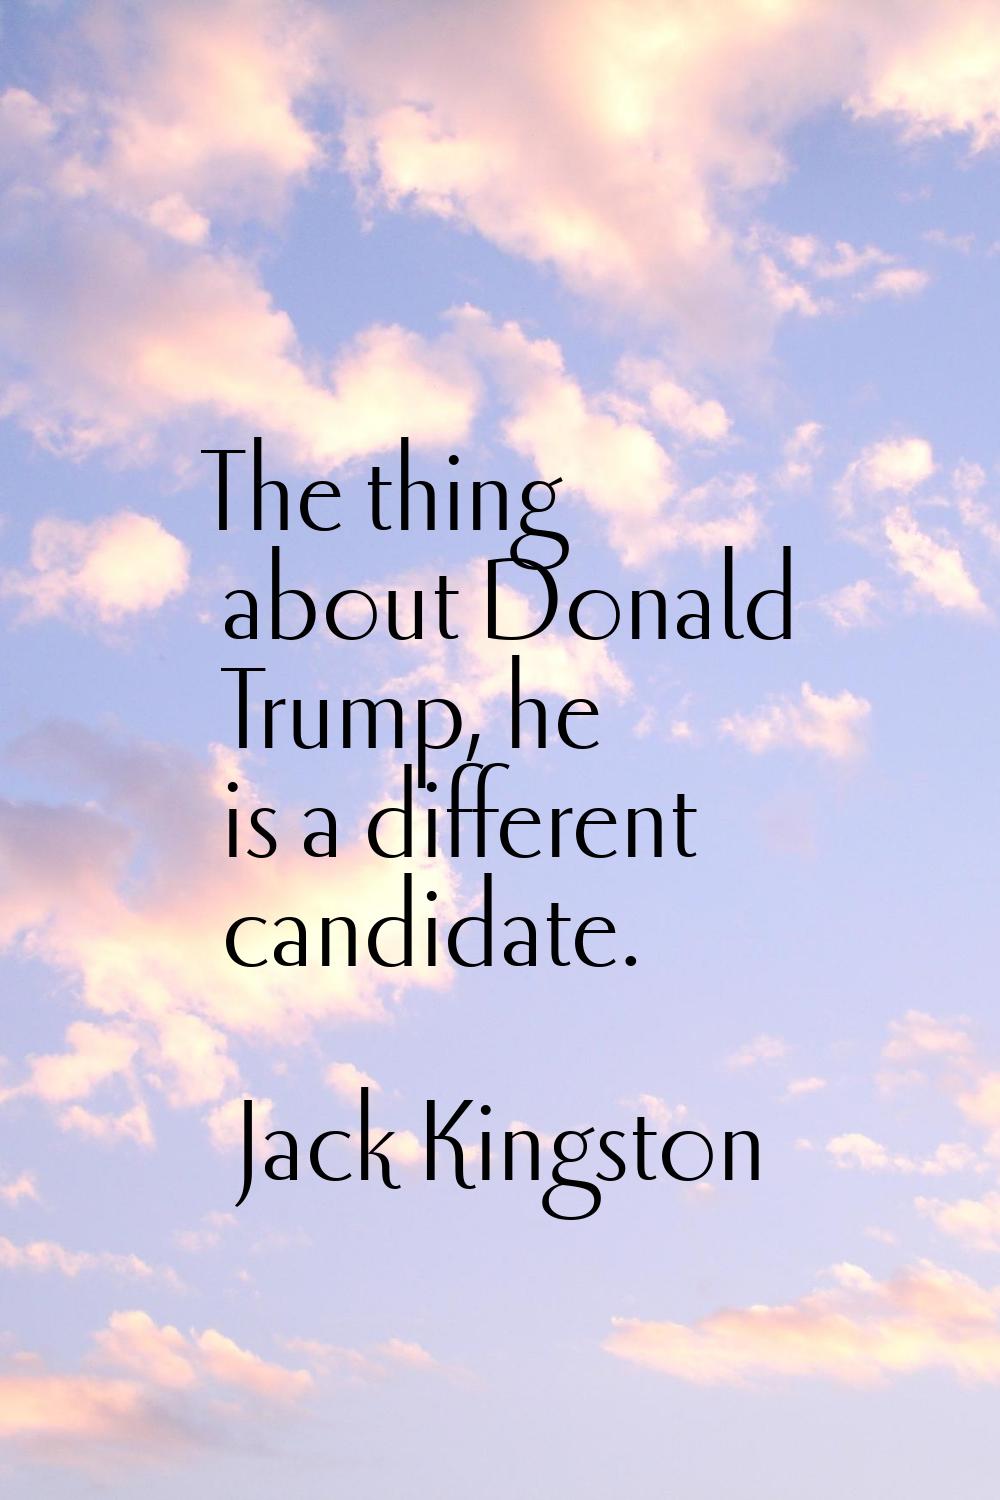 The thing about Donald Trump, he is a different candidate.